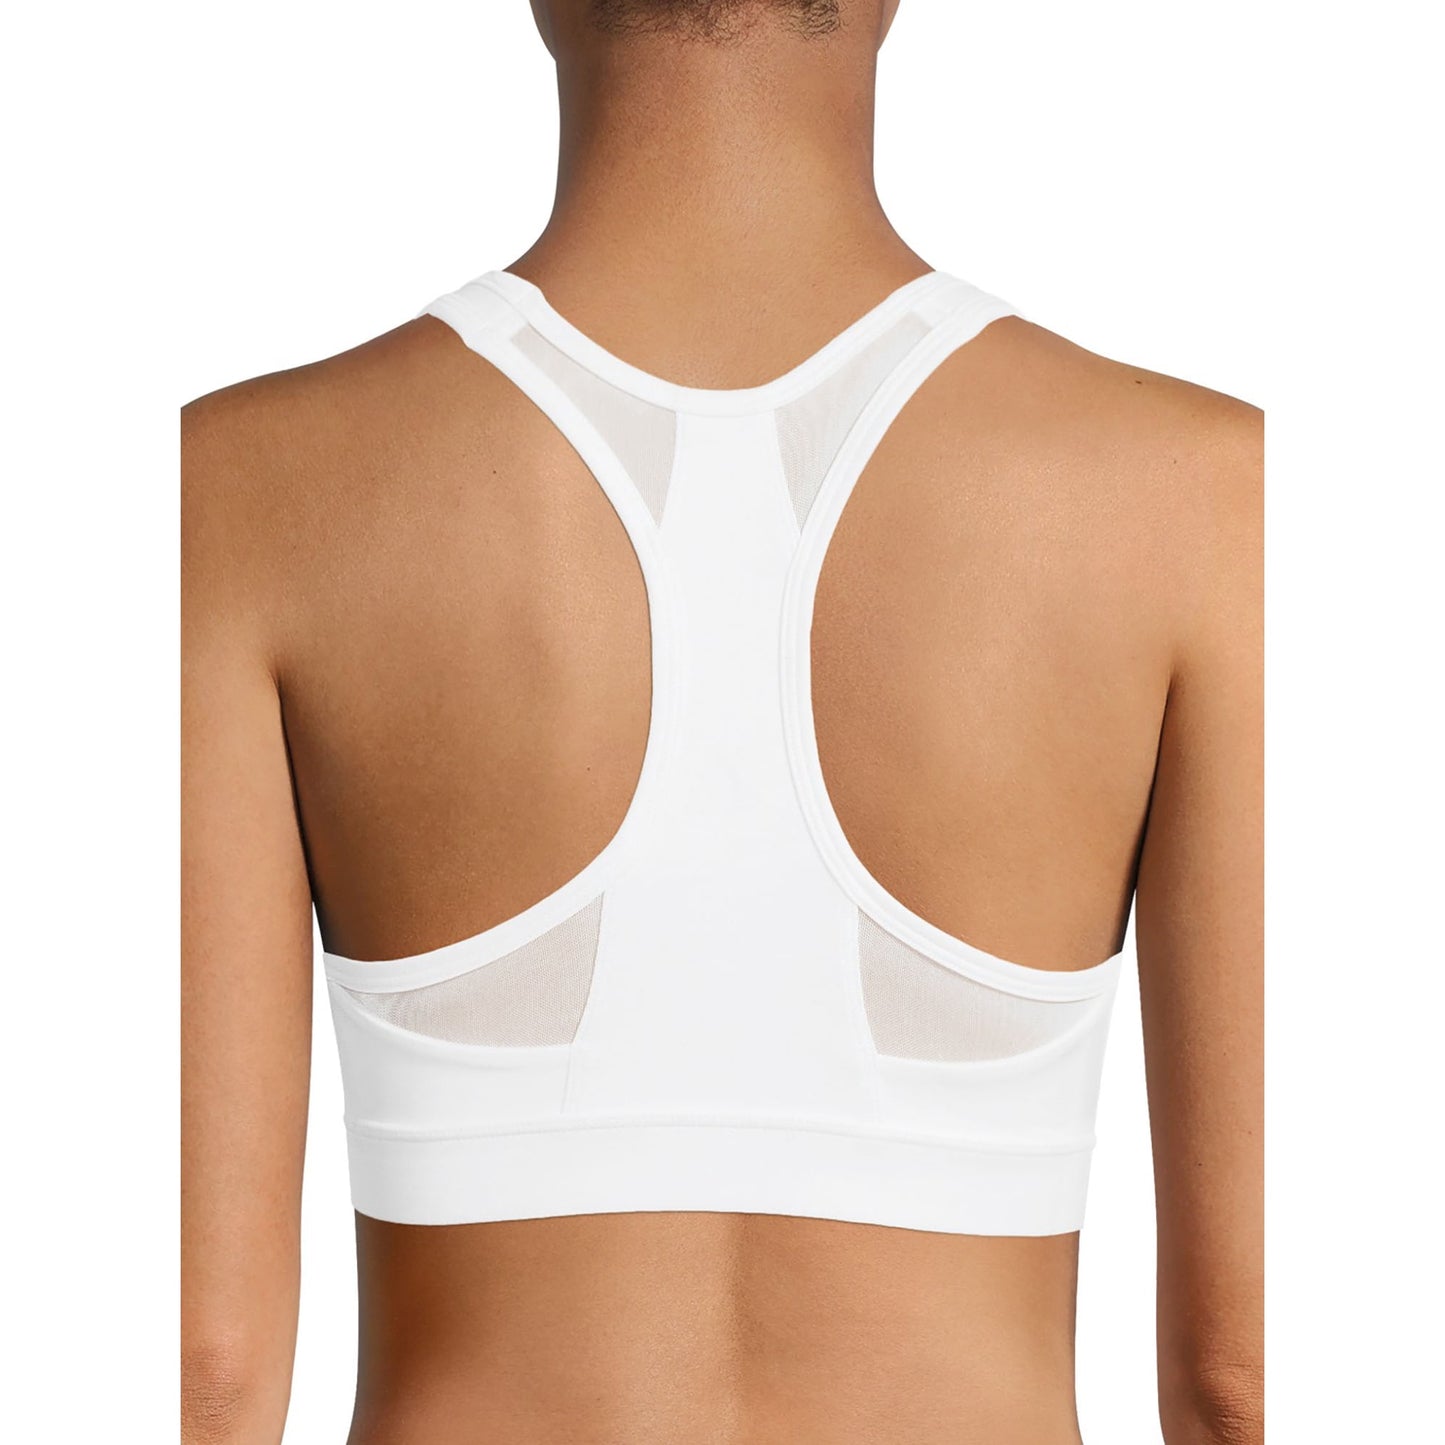 Avia Womens Ventilated Molded Cup Sports Bra